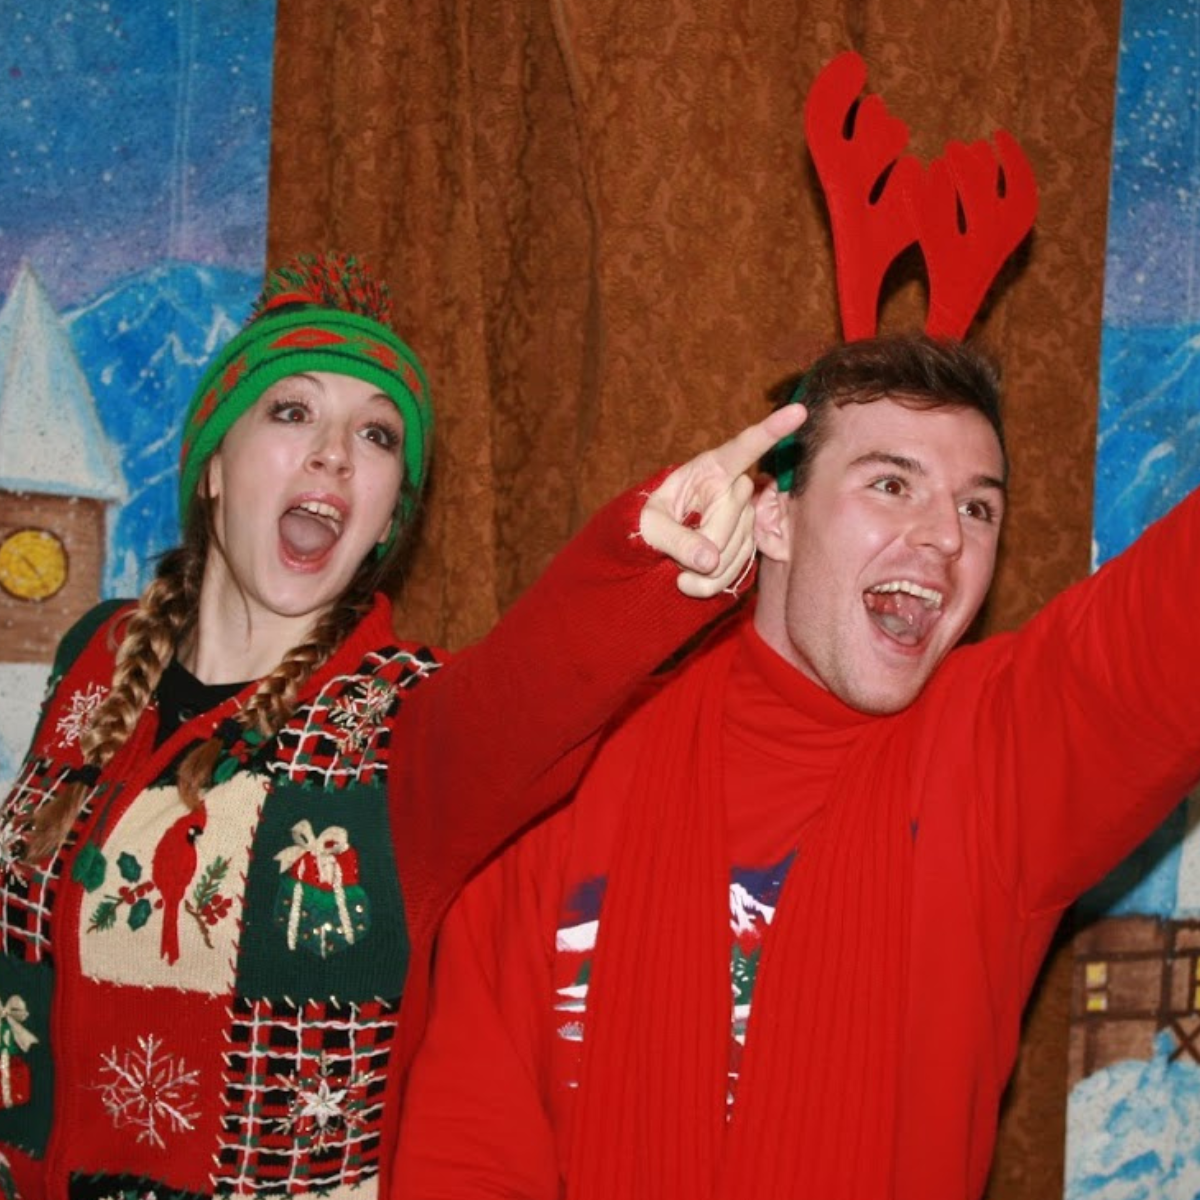 woman and man wearing holiday sweaters and pointing to the side